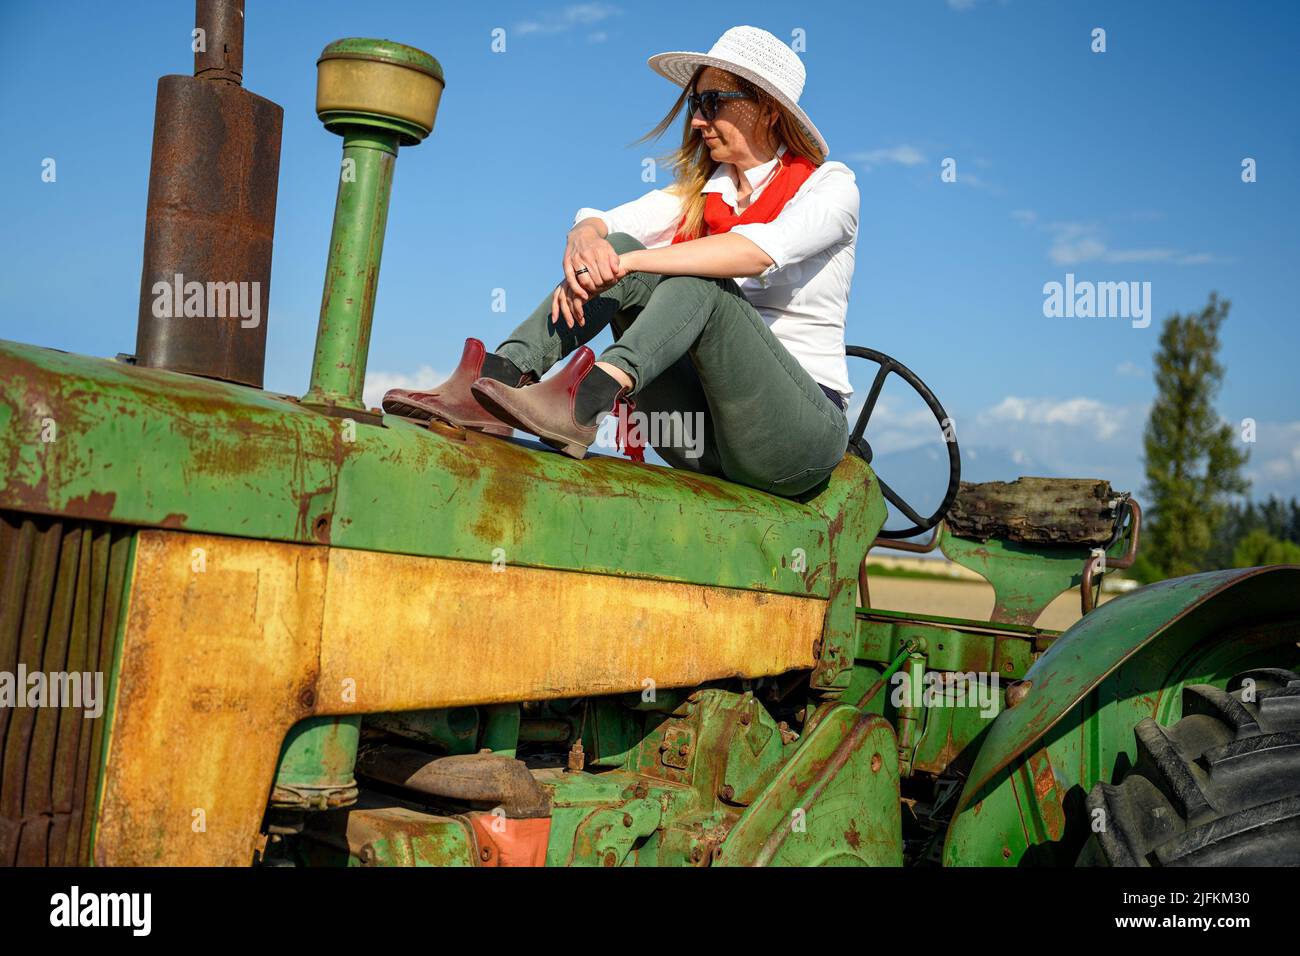 Urban woman in casual clothing sitting on an old tractor against the blue sky in the farmland. Stock Photo